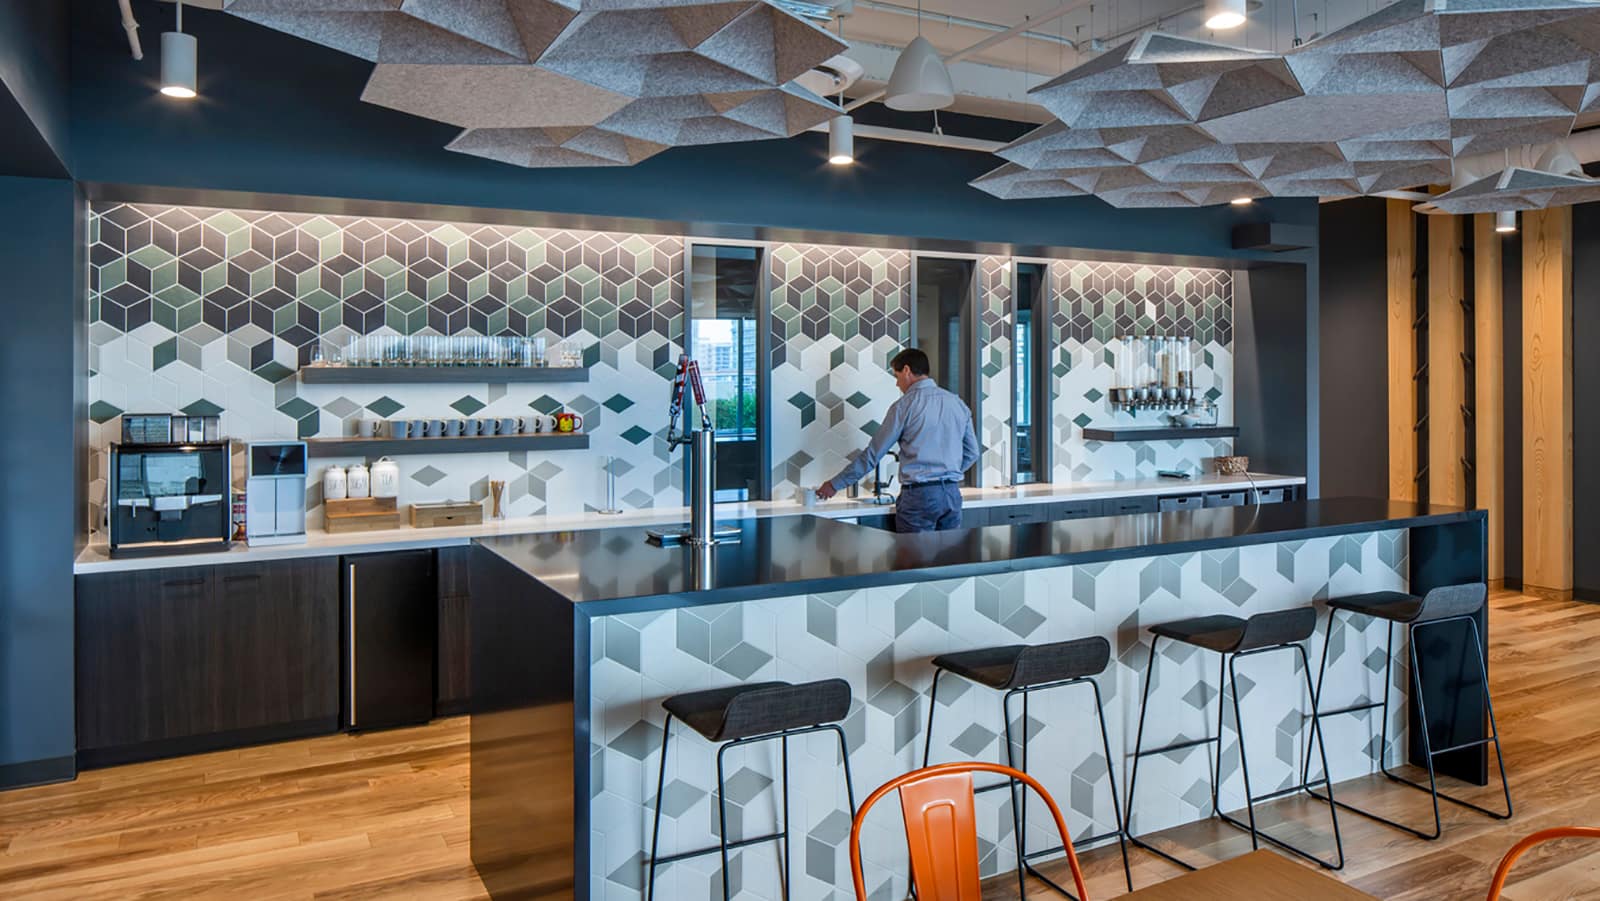 The café and bar space at Rapid7's